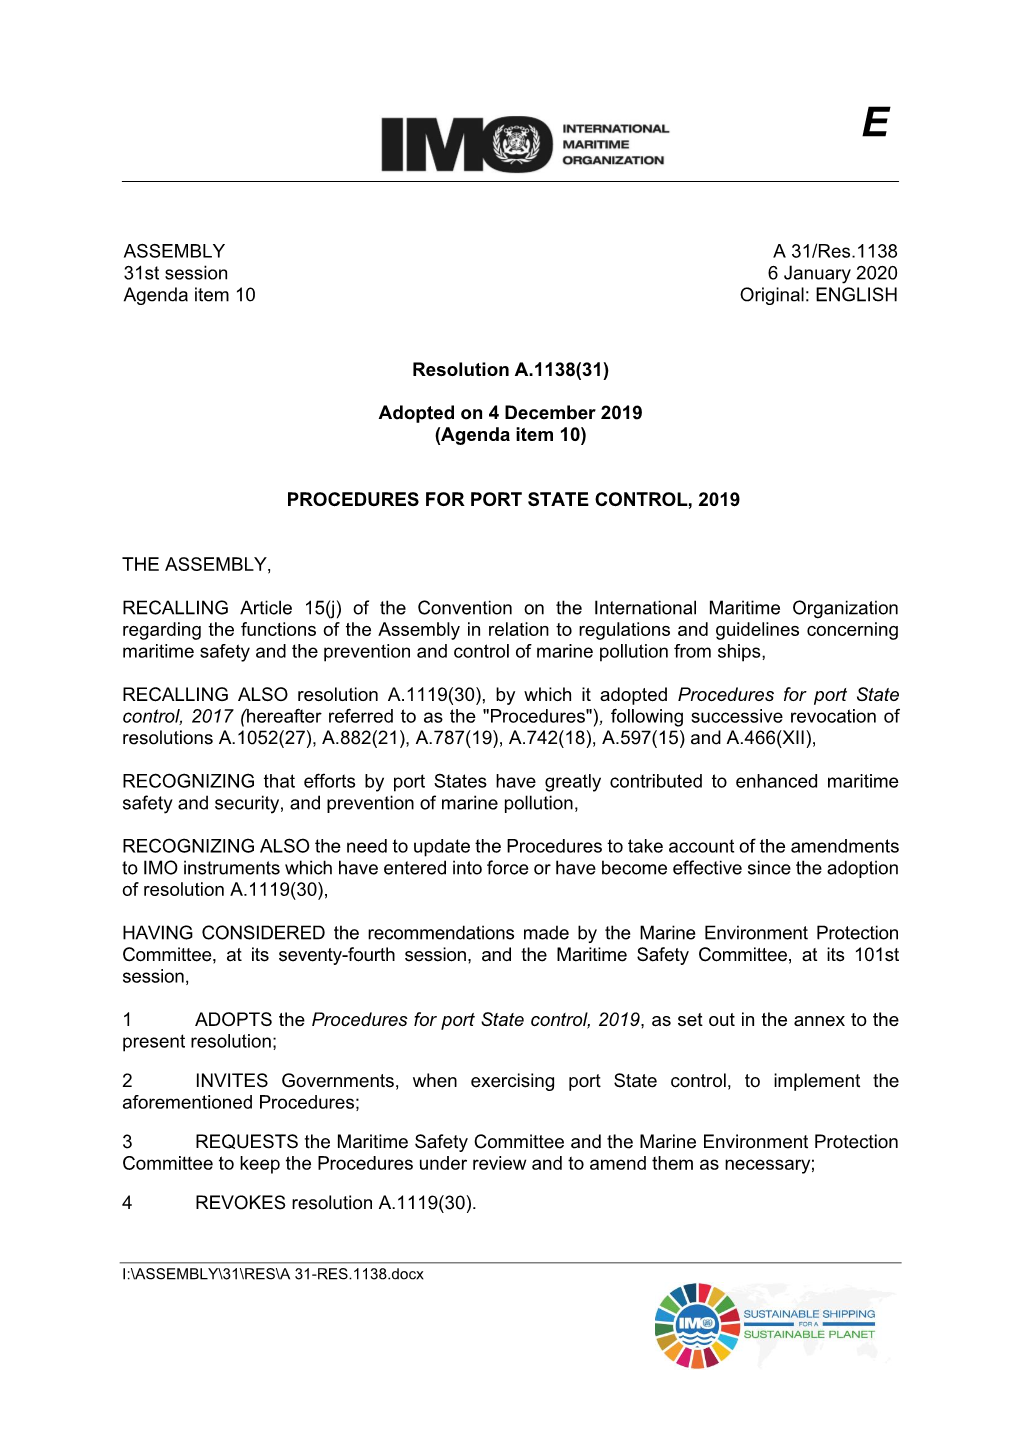 ENGLISH Resolution A.1138(31) Adopted on 4 December